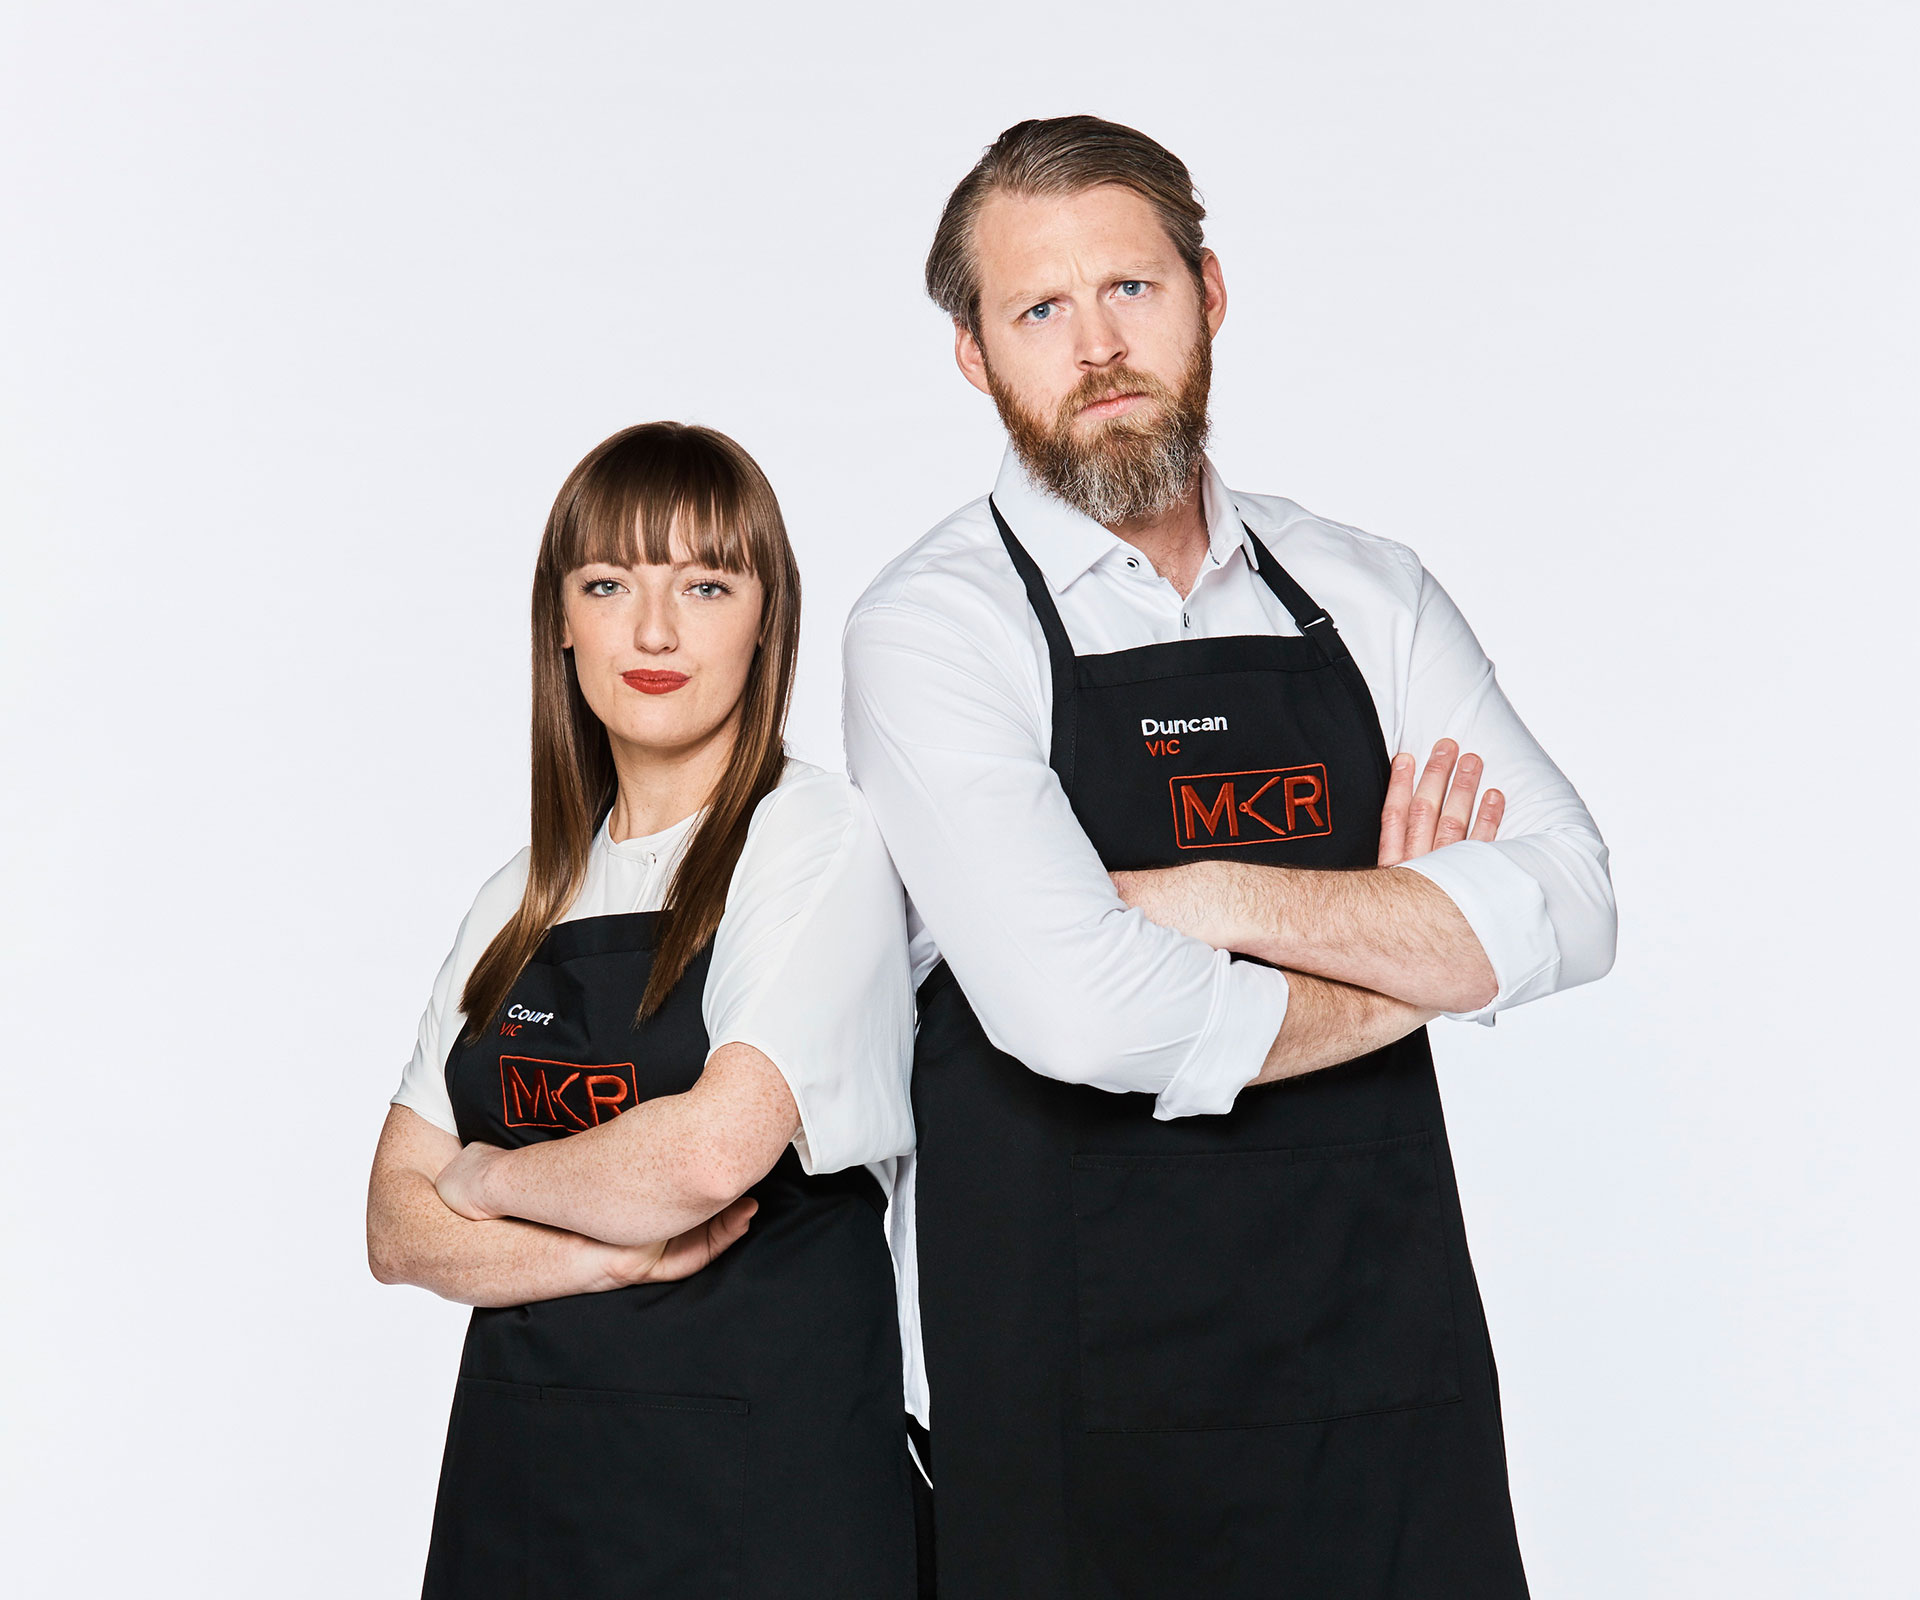 MKR Court and Duncan